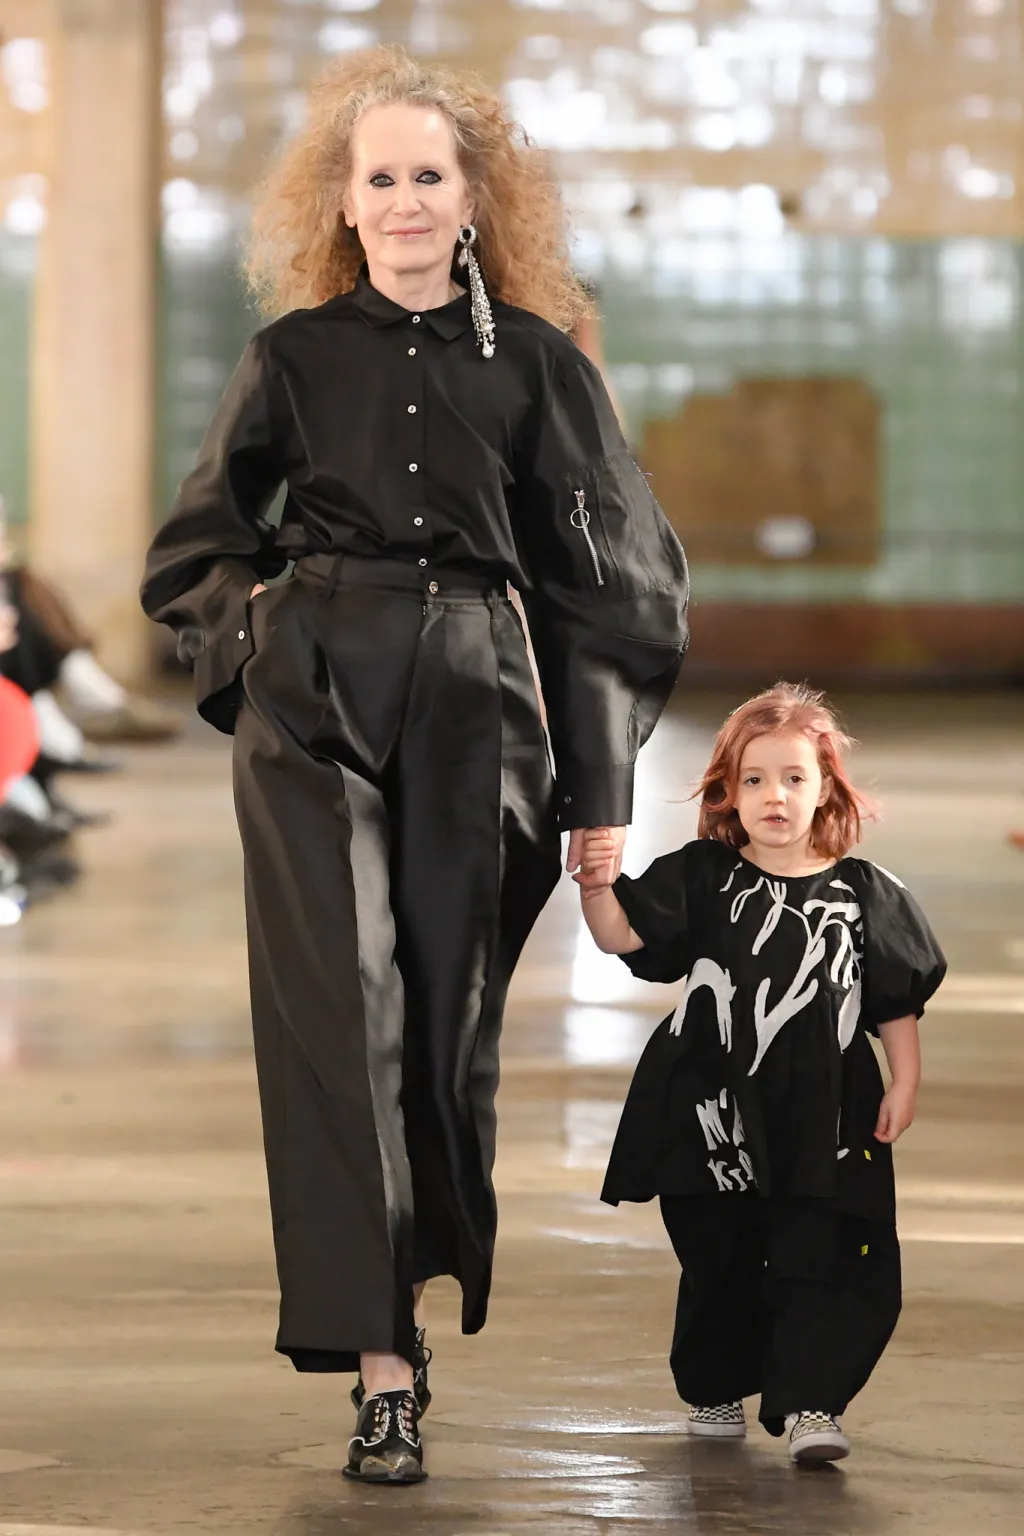 Picture showing a Grand mother and her daughter strutting the fashion show